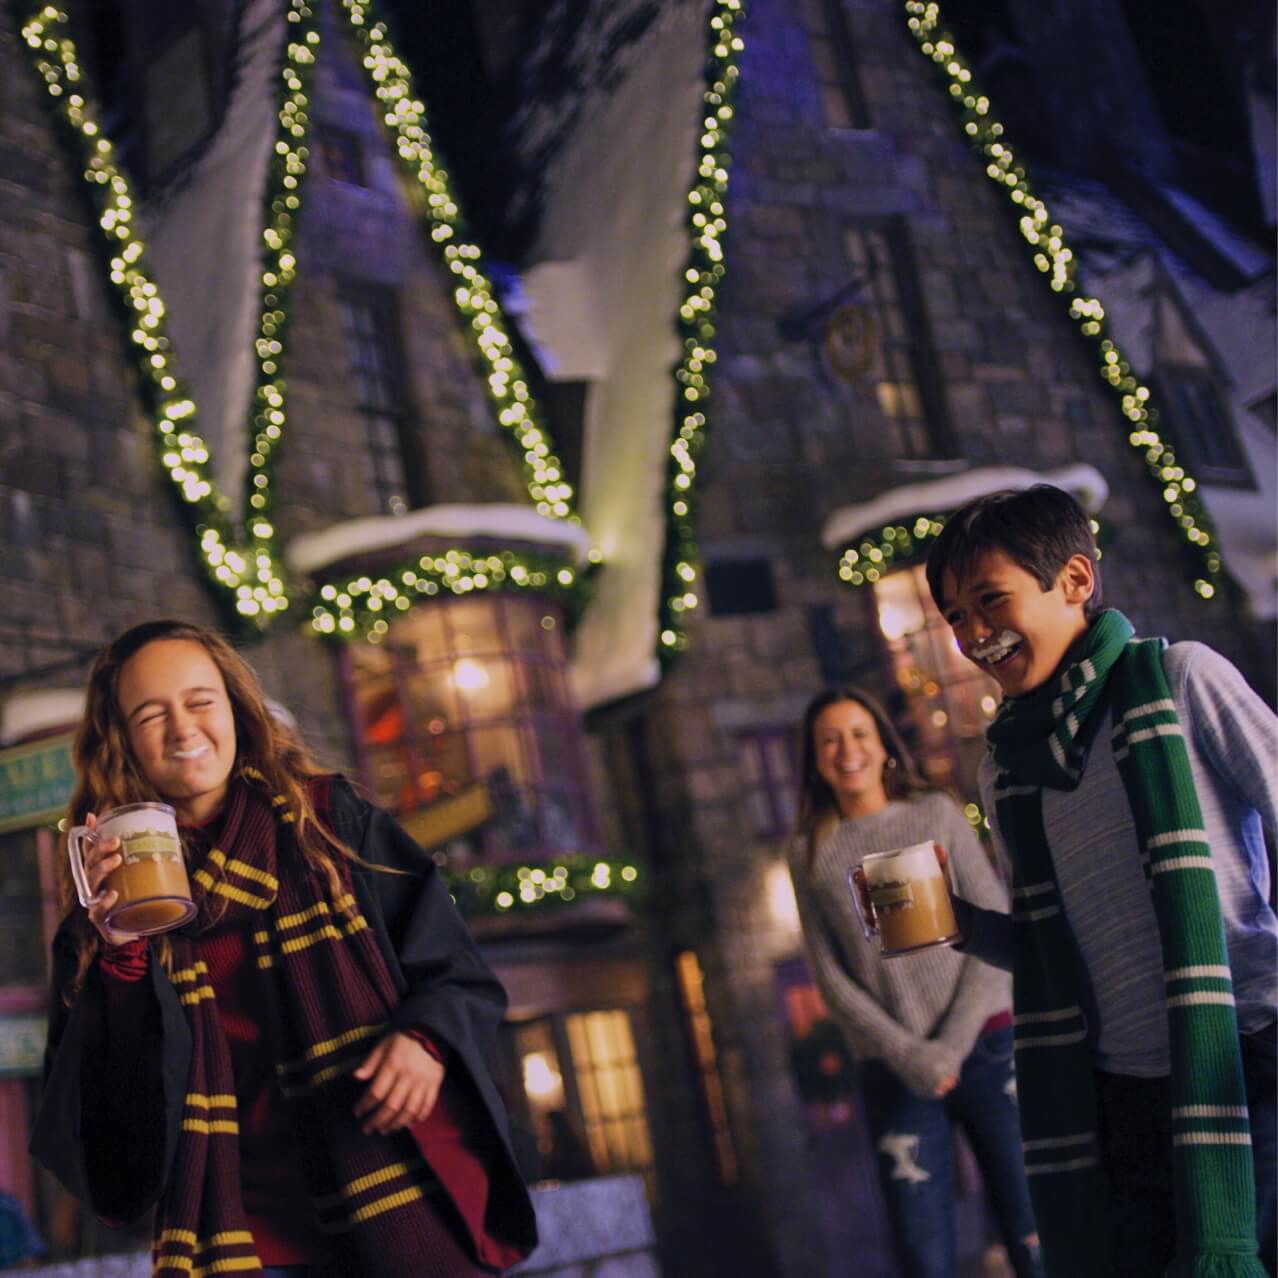 A sister and brother with Butterbeer™ mustaches laugh together in The Wizarding World of Harry Potter – Hogsmeade™, decorated for the holidays.